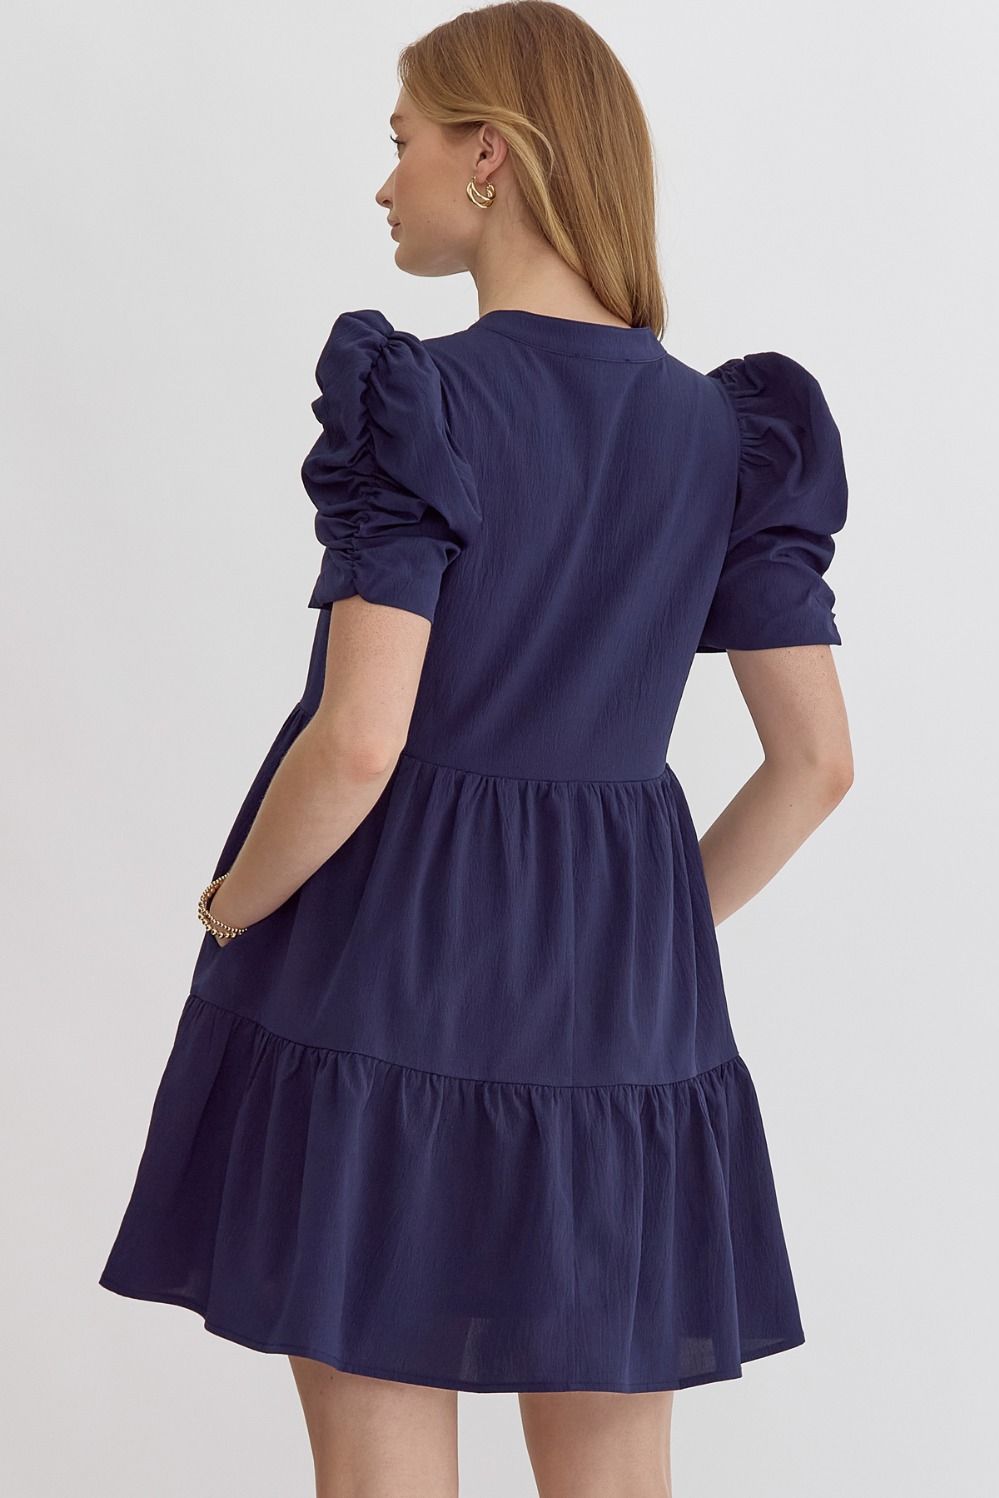 The Polly Dress